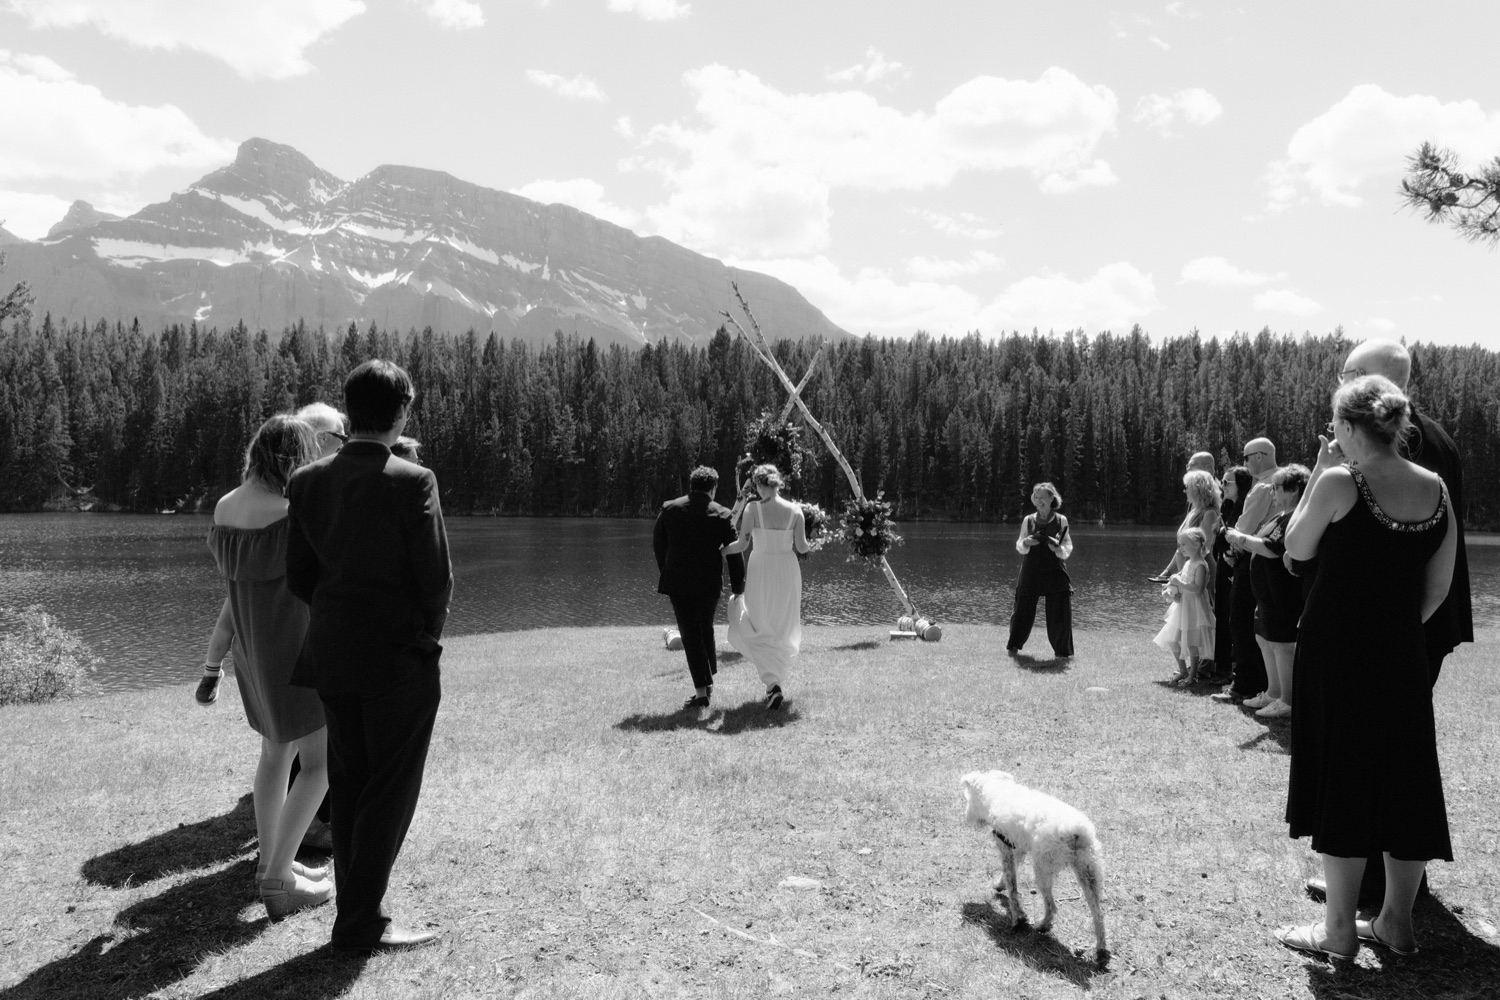 Couple do a processional with their dog together to a birch altar on a grassy knoll overlooking a green glacial lake and mountain